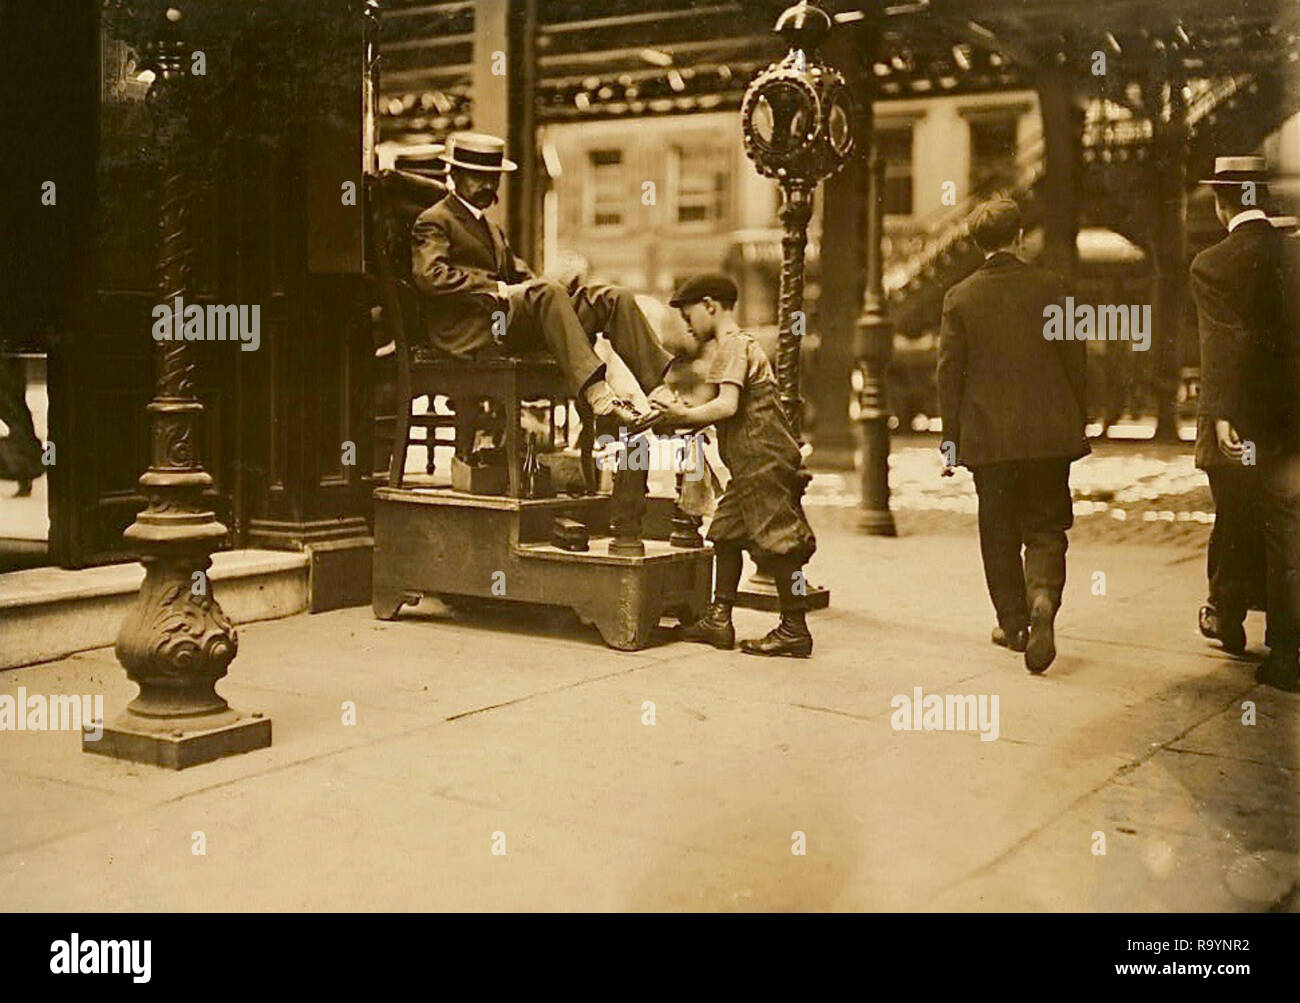 Shoeshine, 3rd Ave & 9th St. New York July 1910 Stock Photo